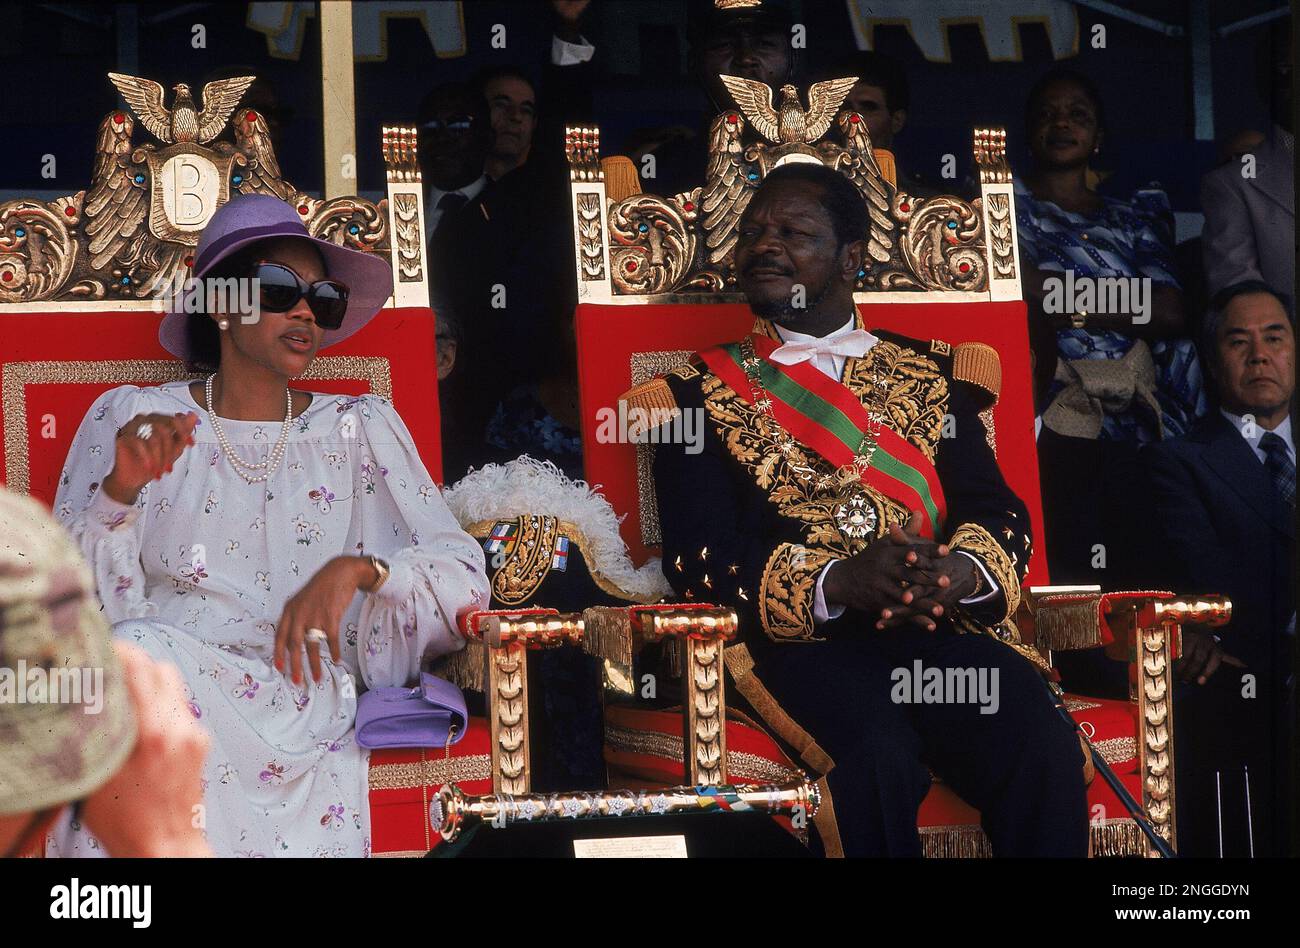 Emperor Jean-Bedel Bokassa, dictator of Central African Empire, is shown with his wife, Empress Catherine, as he crowns himself emperor of the Central African Empire on Dec. 4, 1977. (AP Photo) Stock Photo